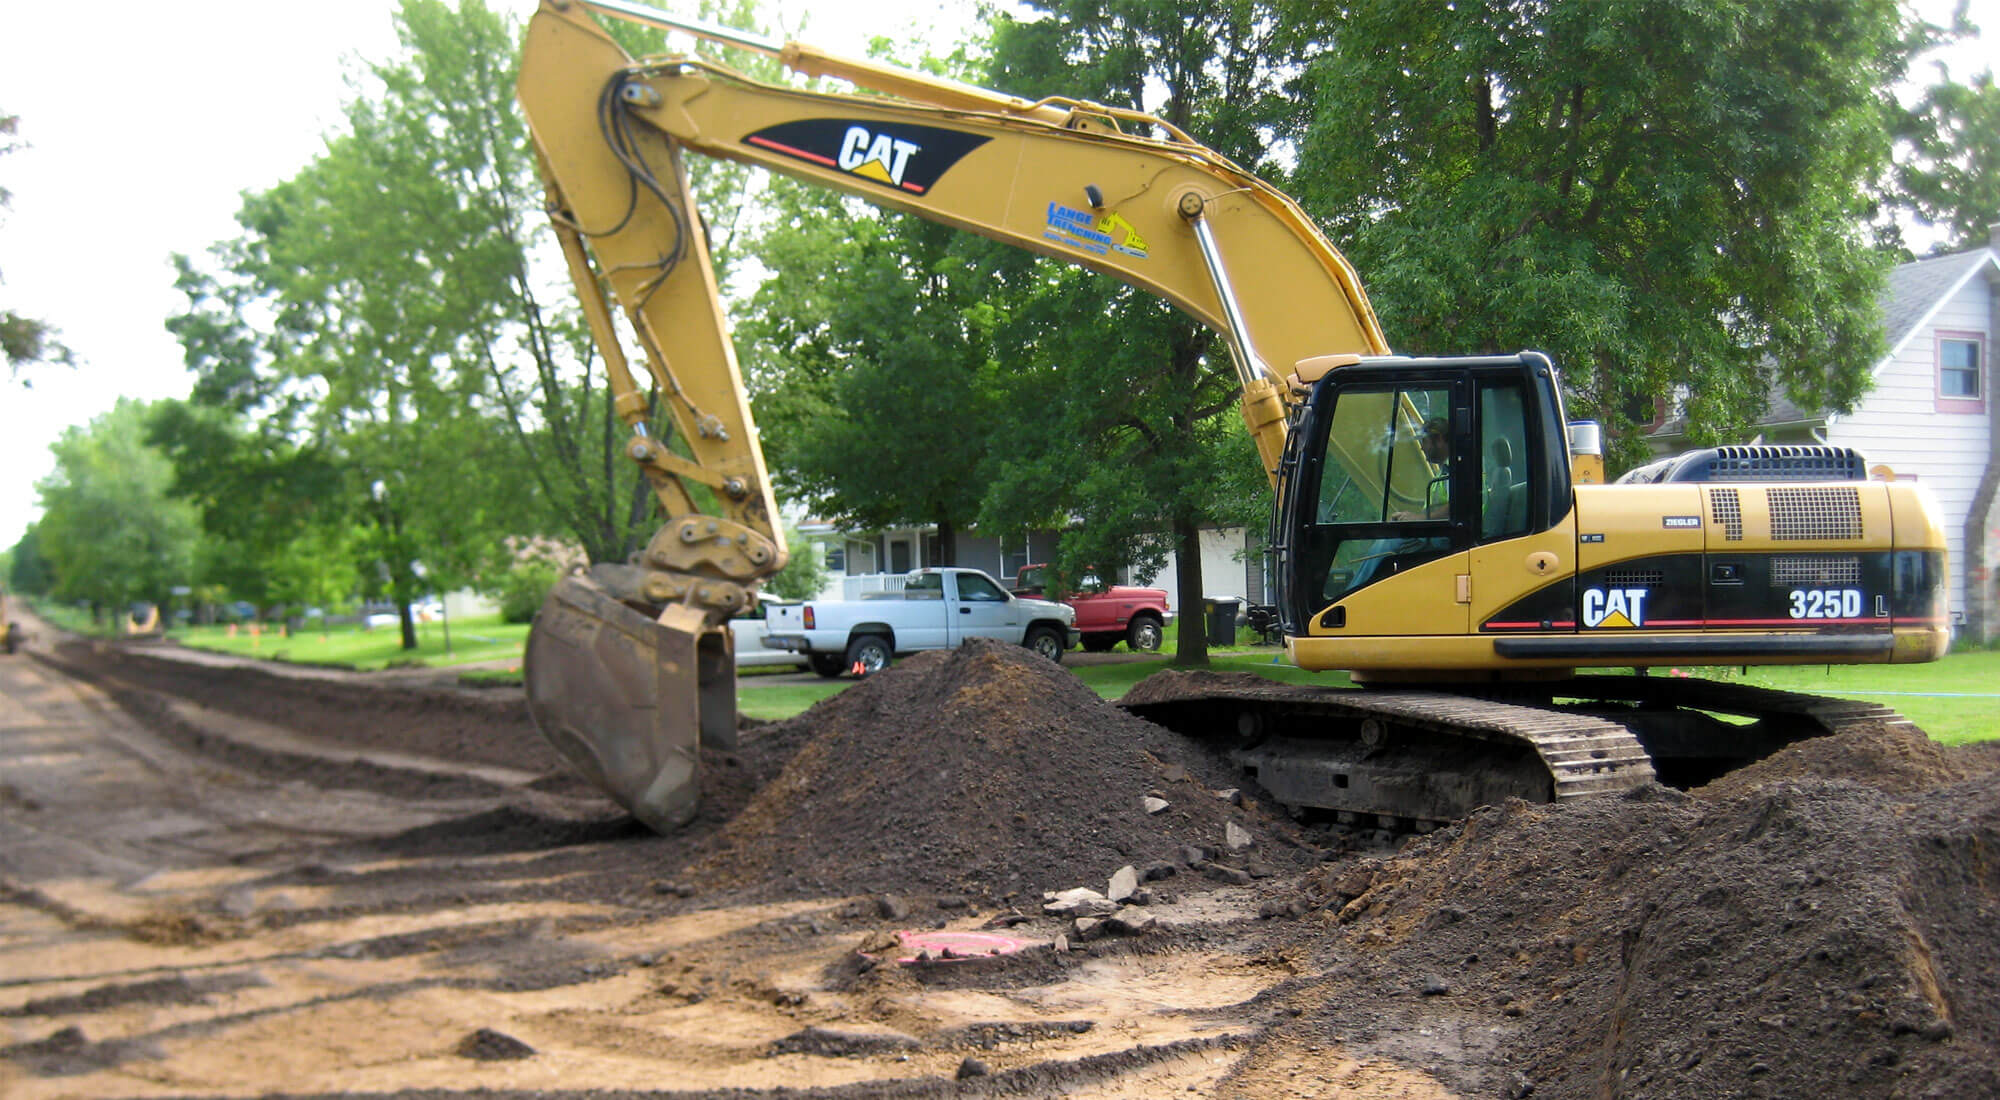 Large CAT excavator providing road maintenance in a residential area